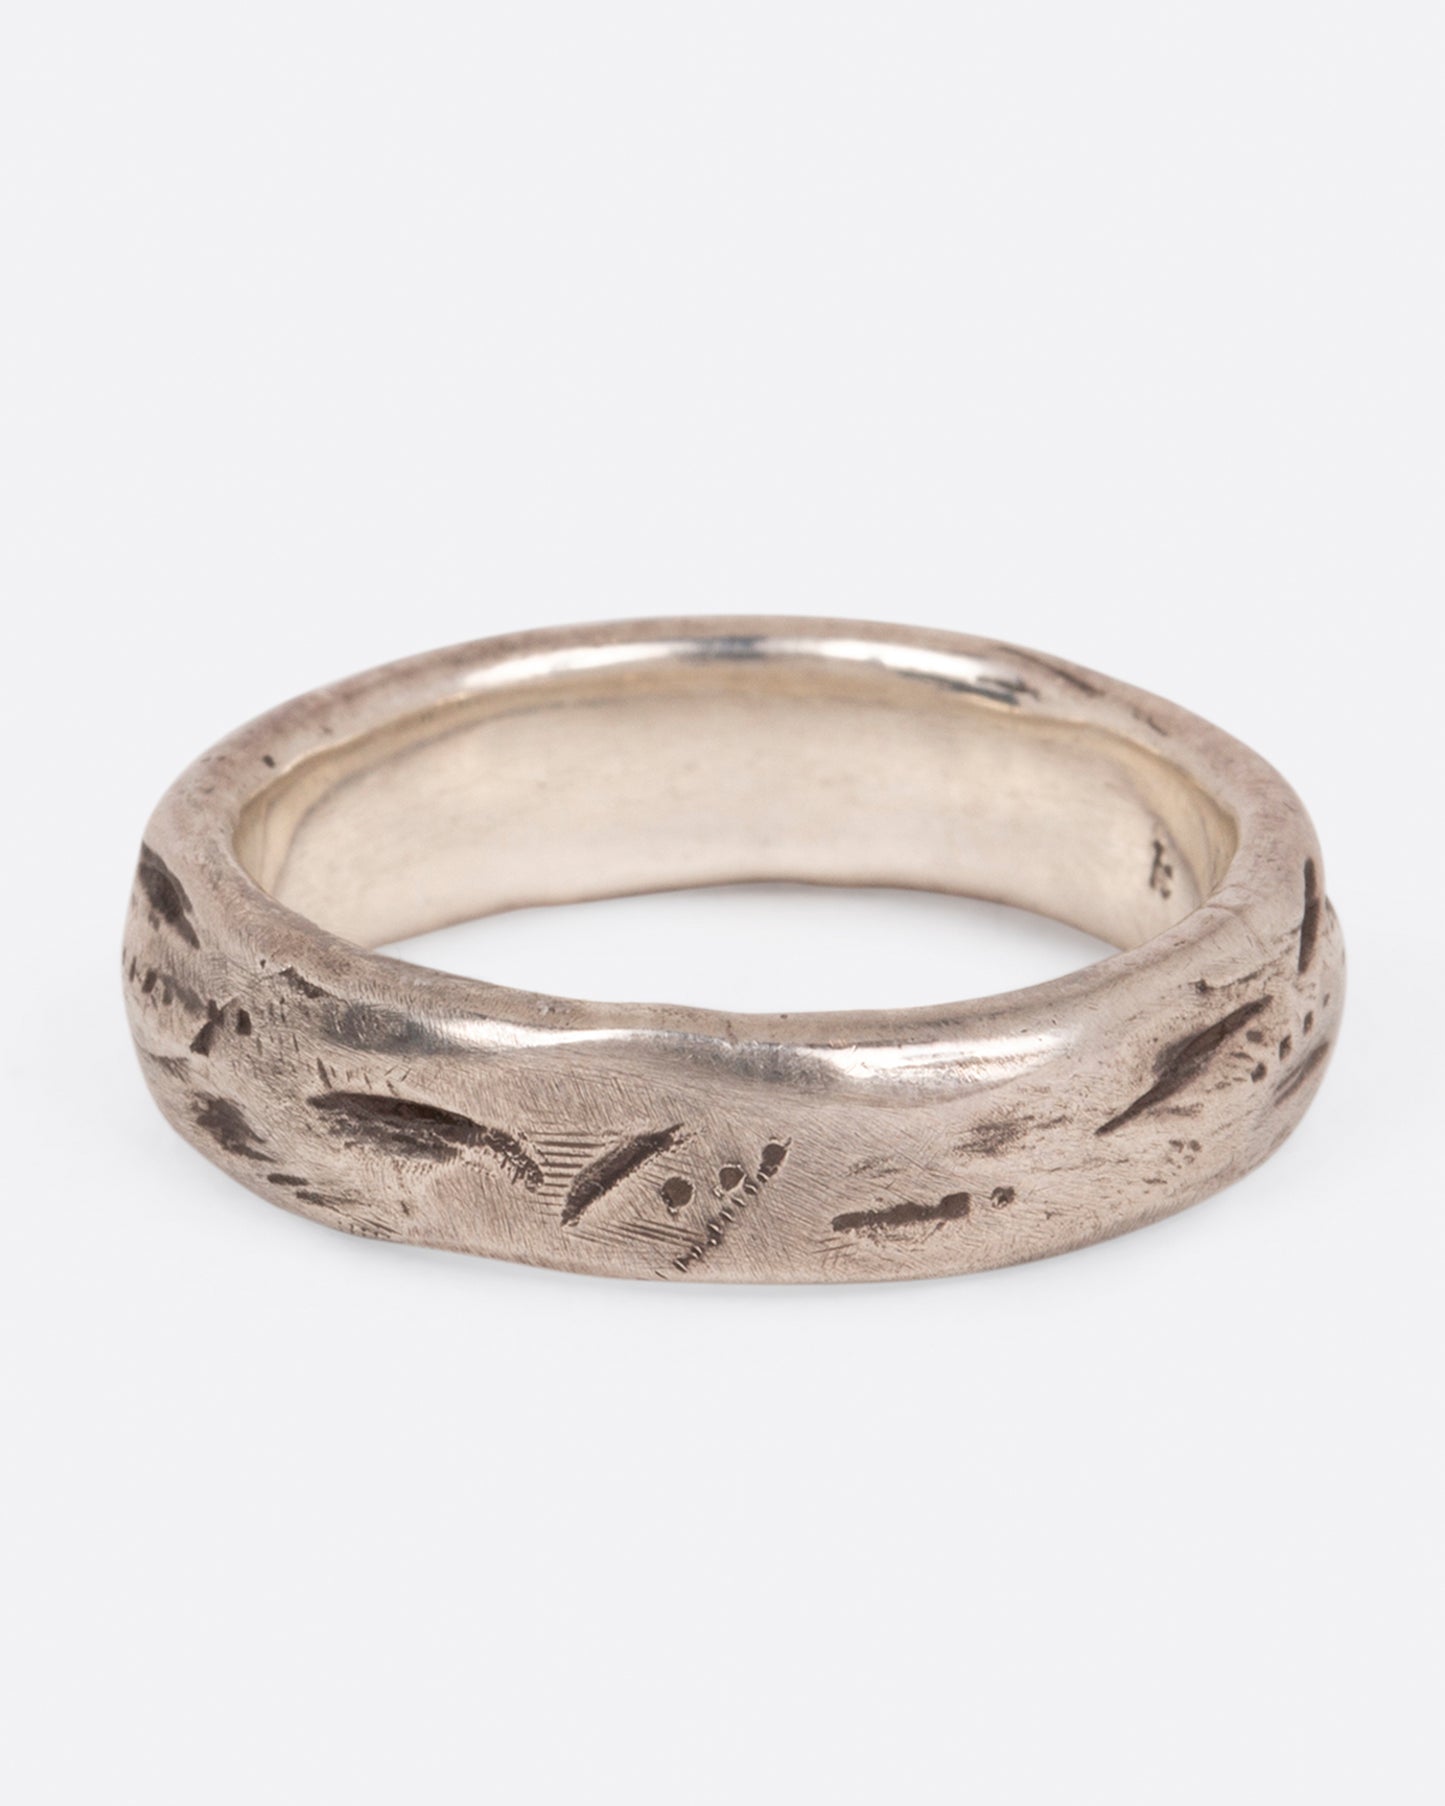 A textured sterling silver band that is meant to look worn in, shown from the front.